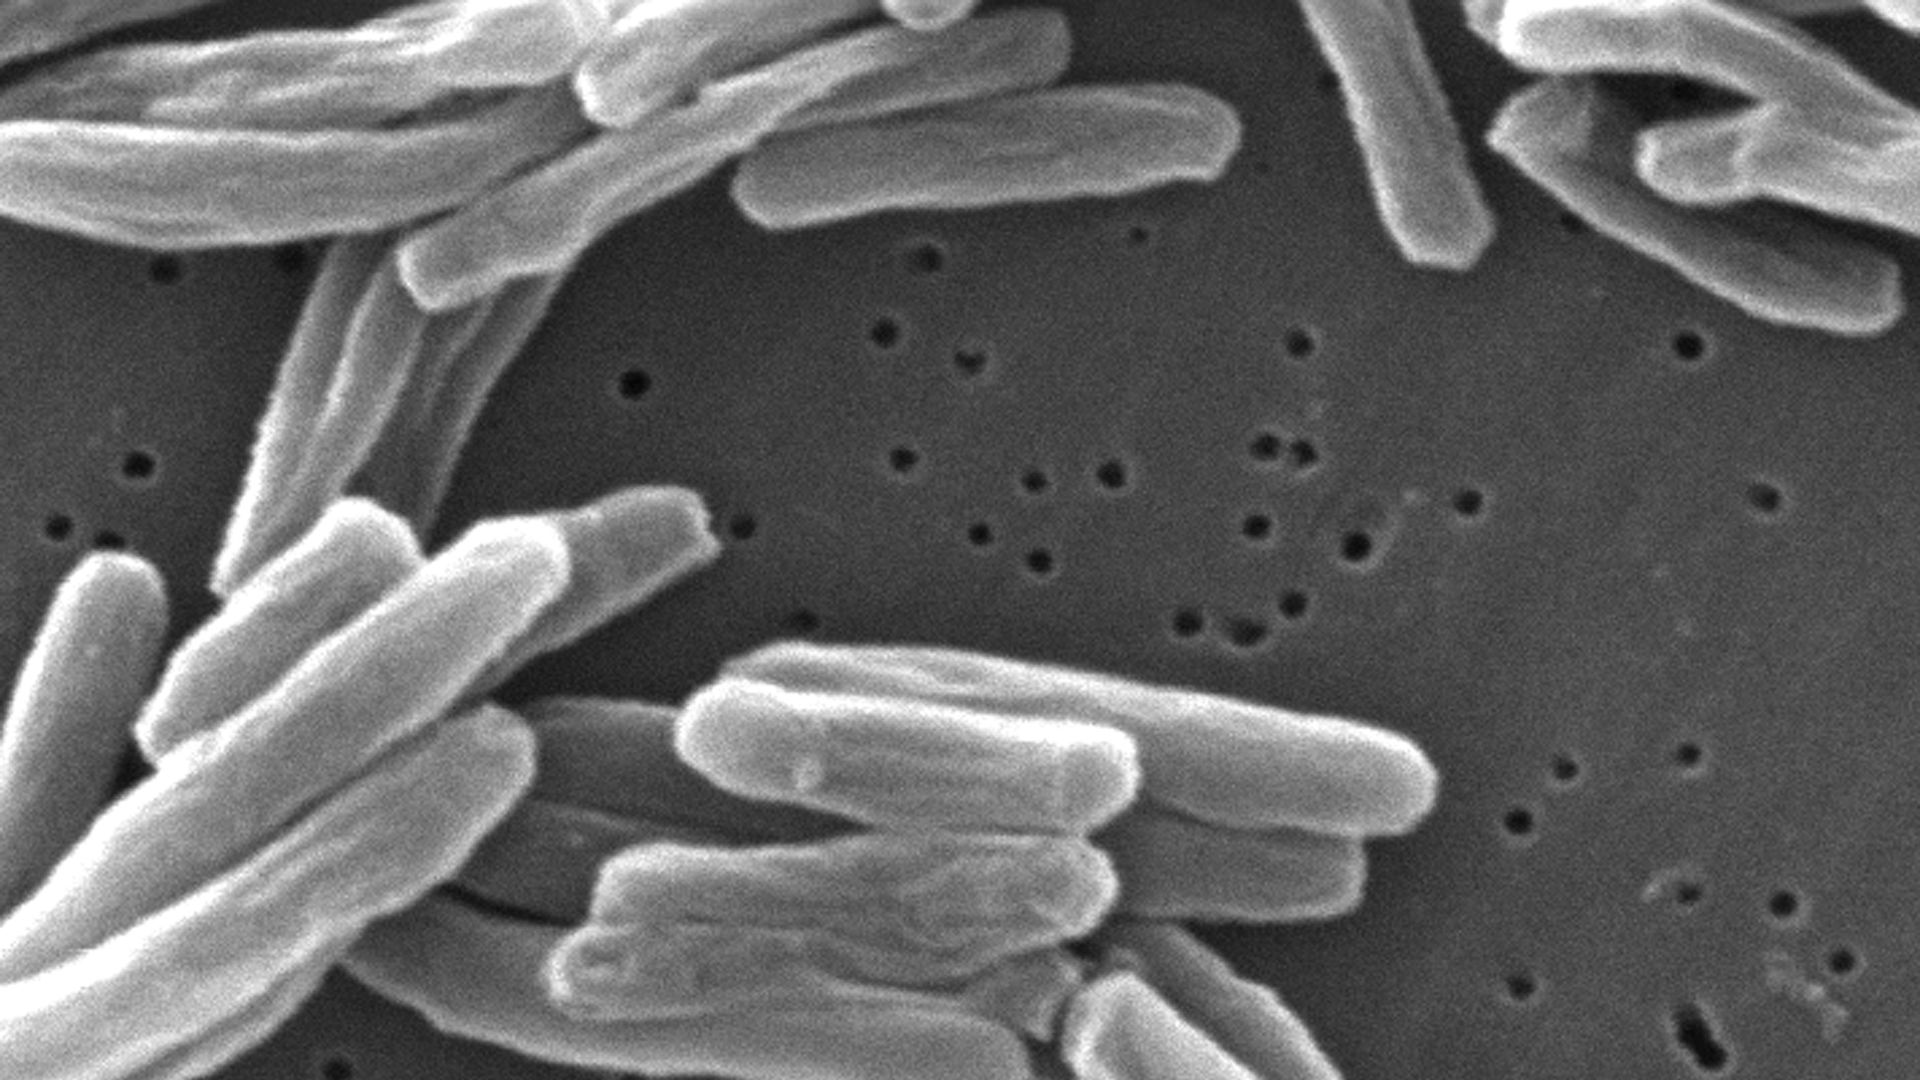 Mycobacterium tuberculosis bacteria under and electronic microscope in 2006.